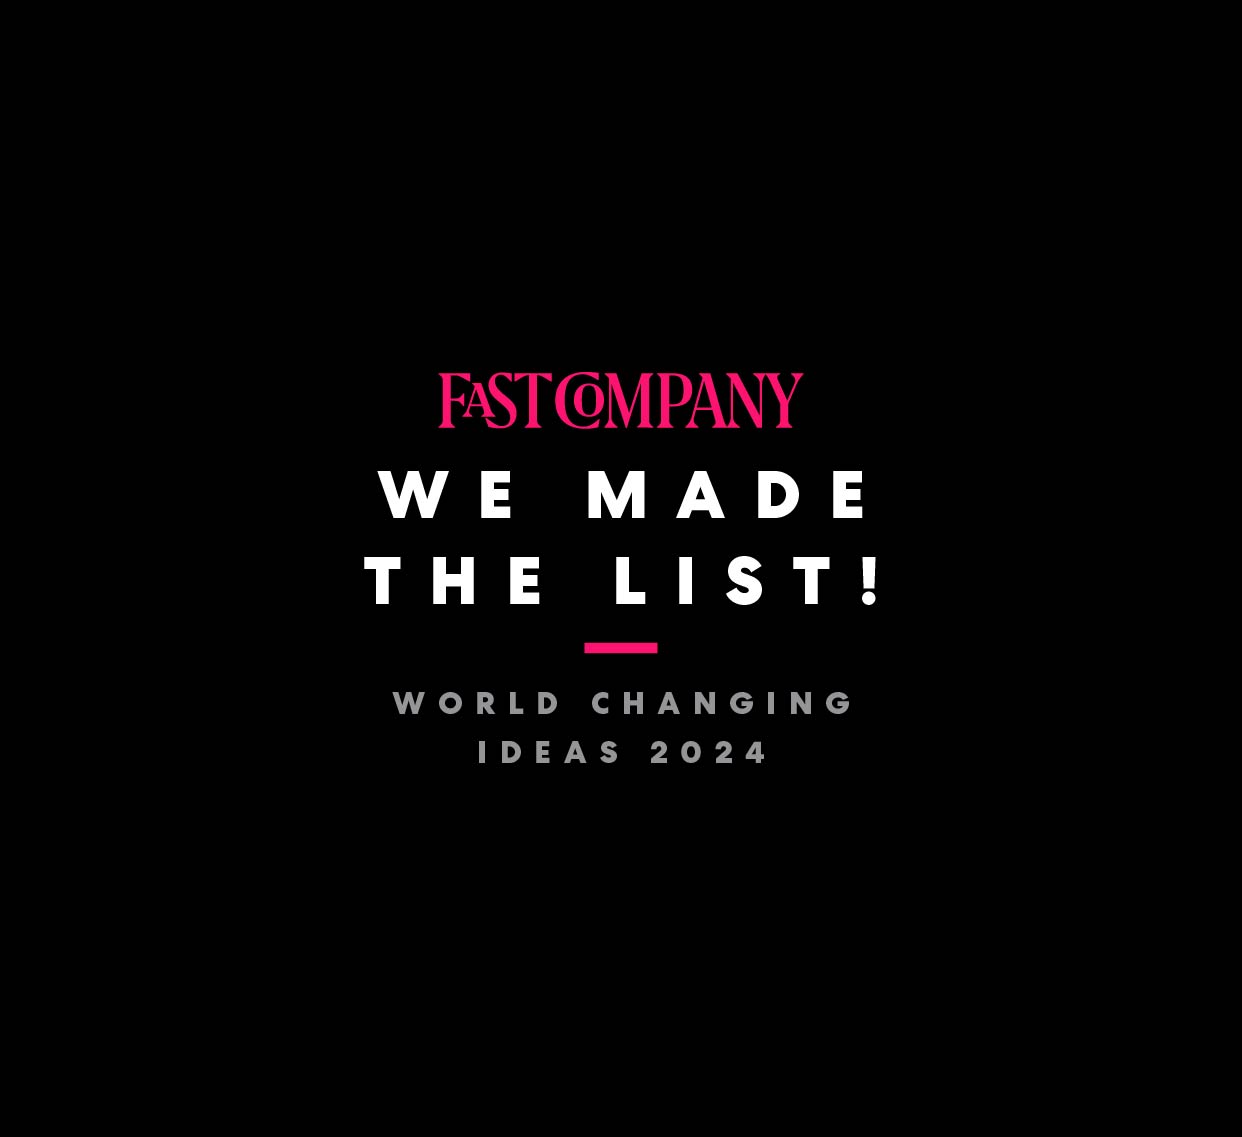 Fast Company We Made the List! branded badge for World Changing Ideas 2024